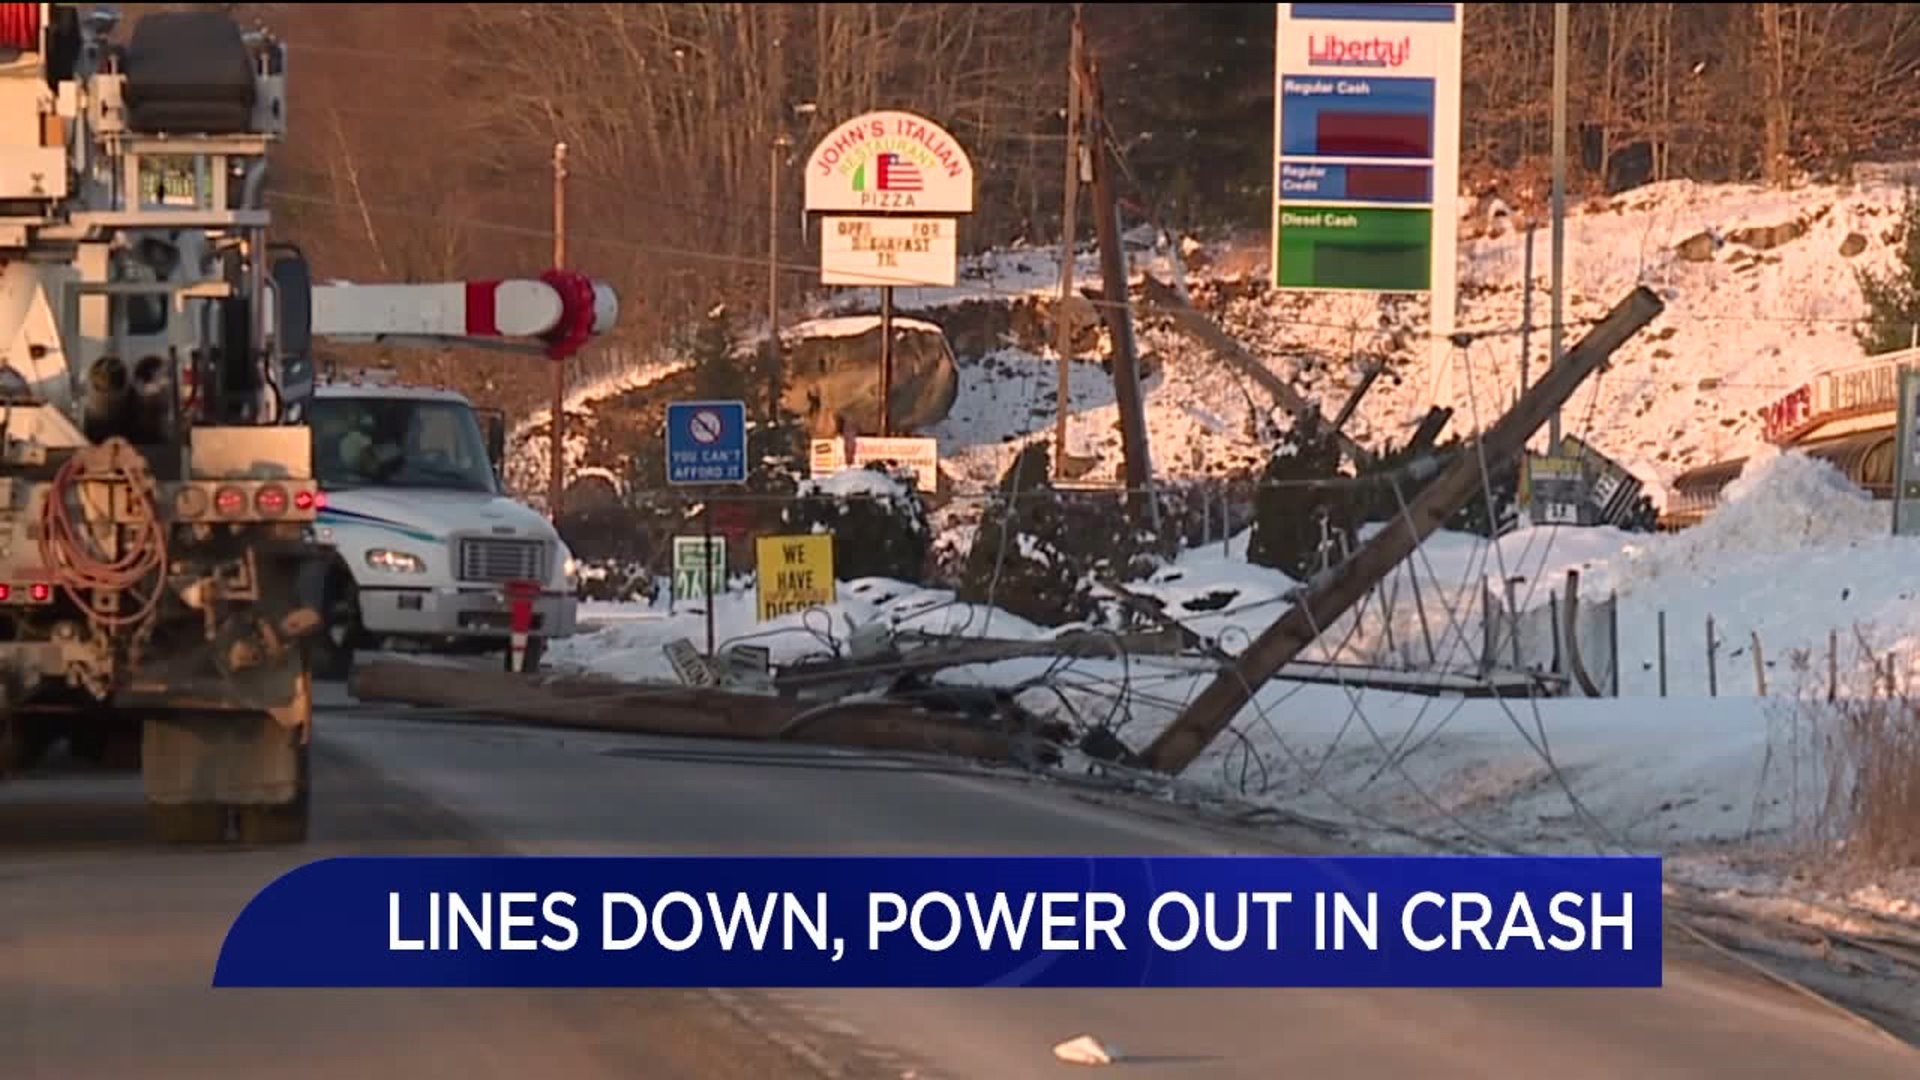 More than 1,000 People Without Power Following Crash in Pike County